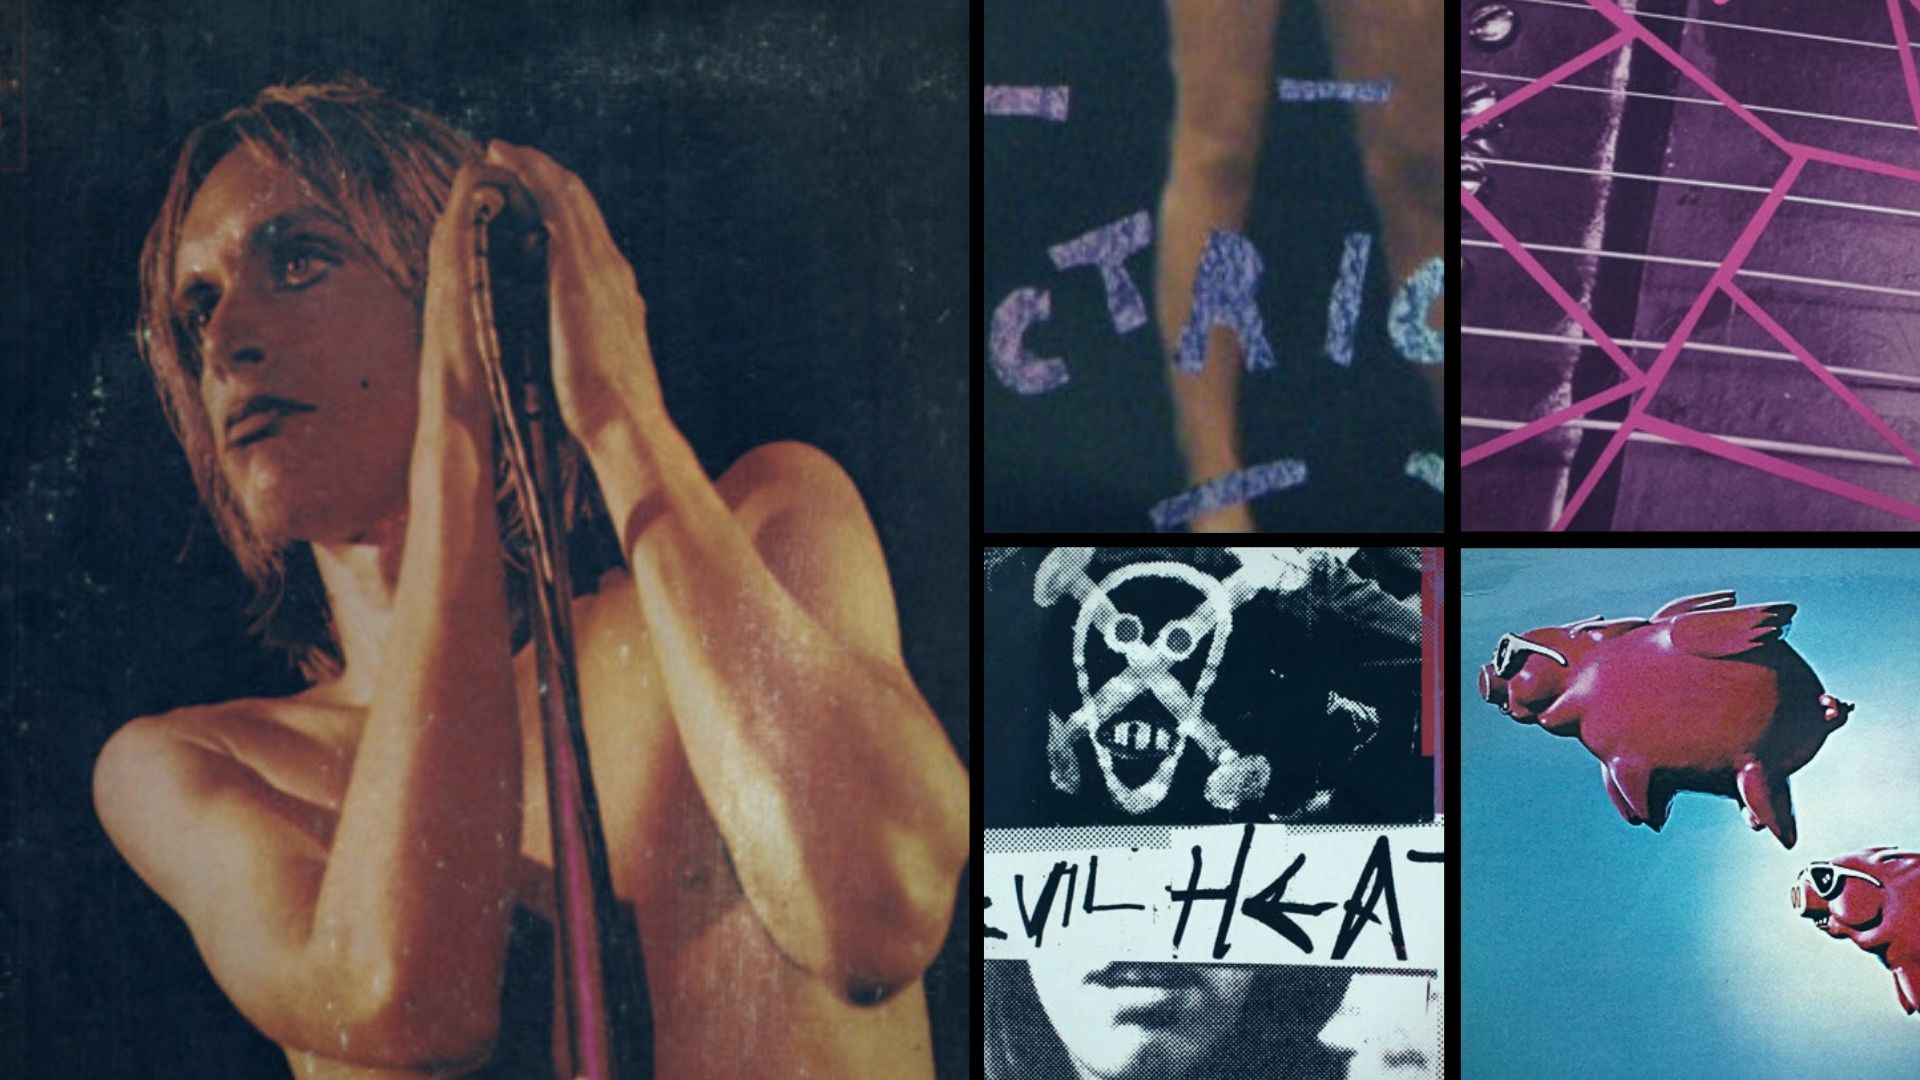 If You Like Raw Power by Iggy Pop and the Stooges, Listen to These 4 Albums